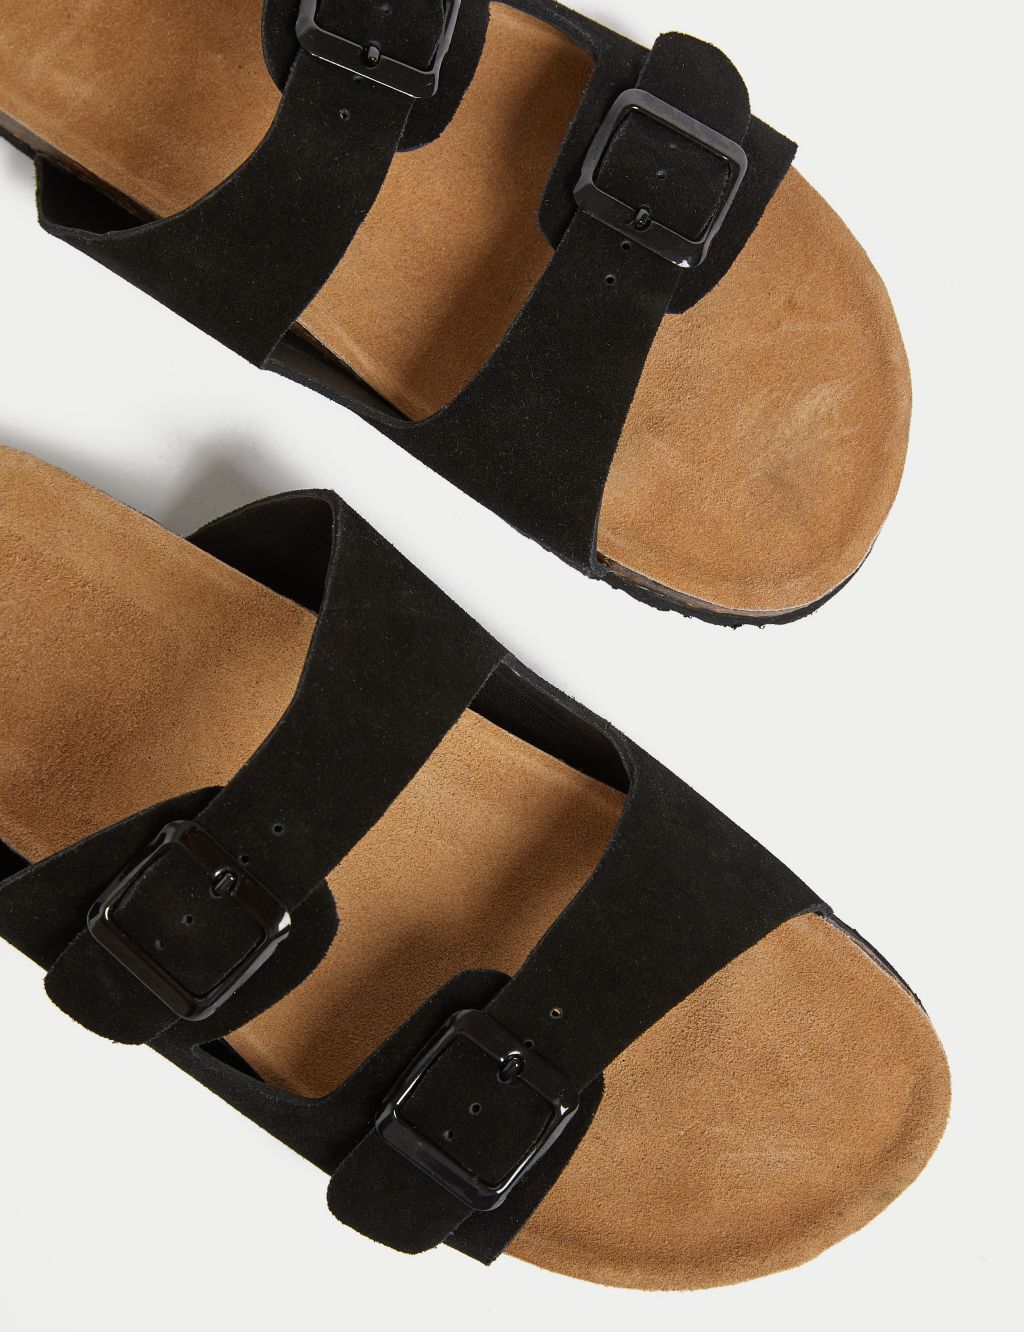 Suede Buckle Footbed Mules image 3